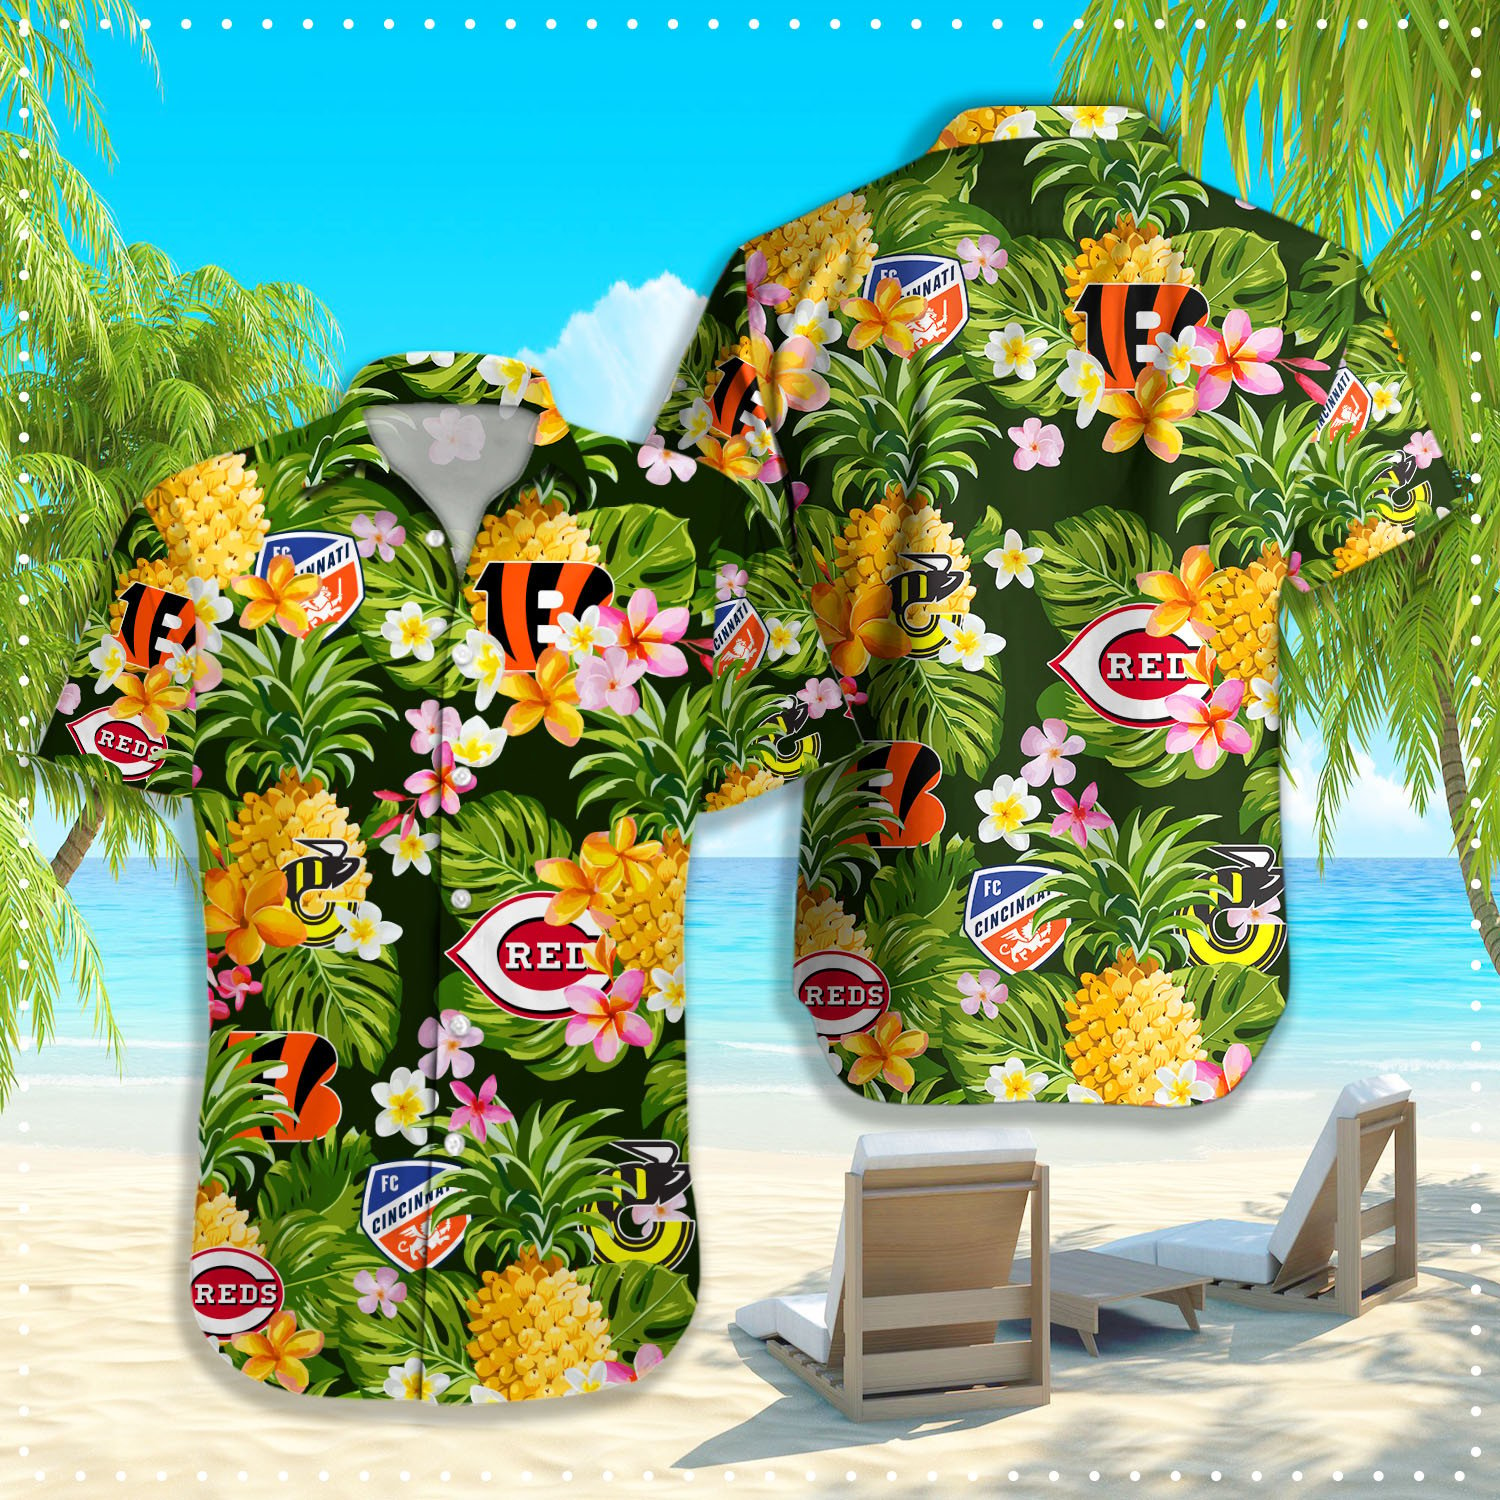 If you're looking for a NHL Hawaiian shirt to wear, don't wait until the last minute! 199